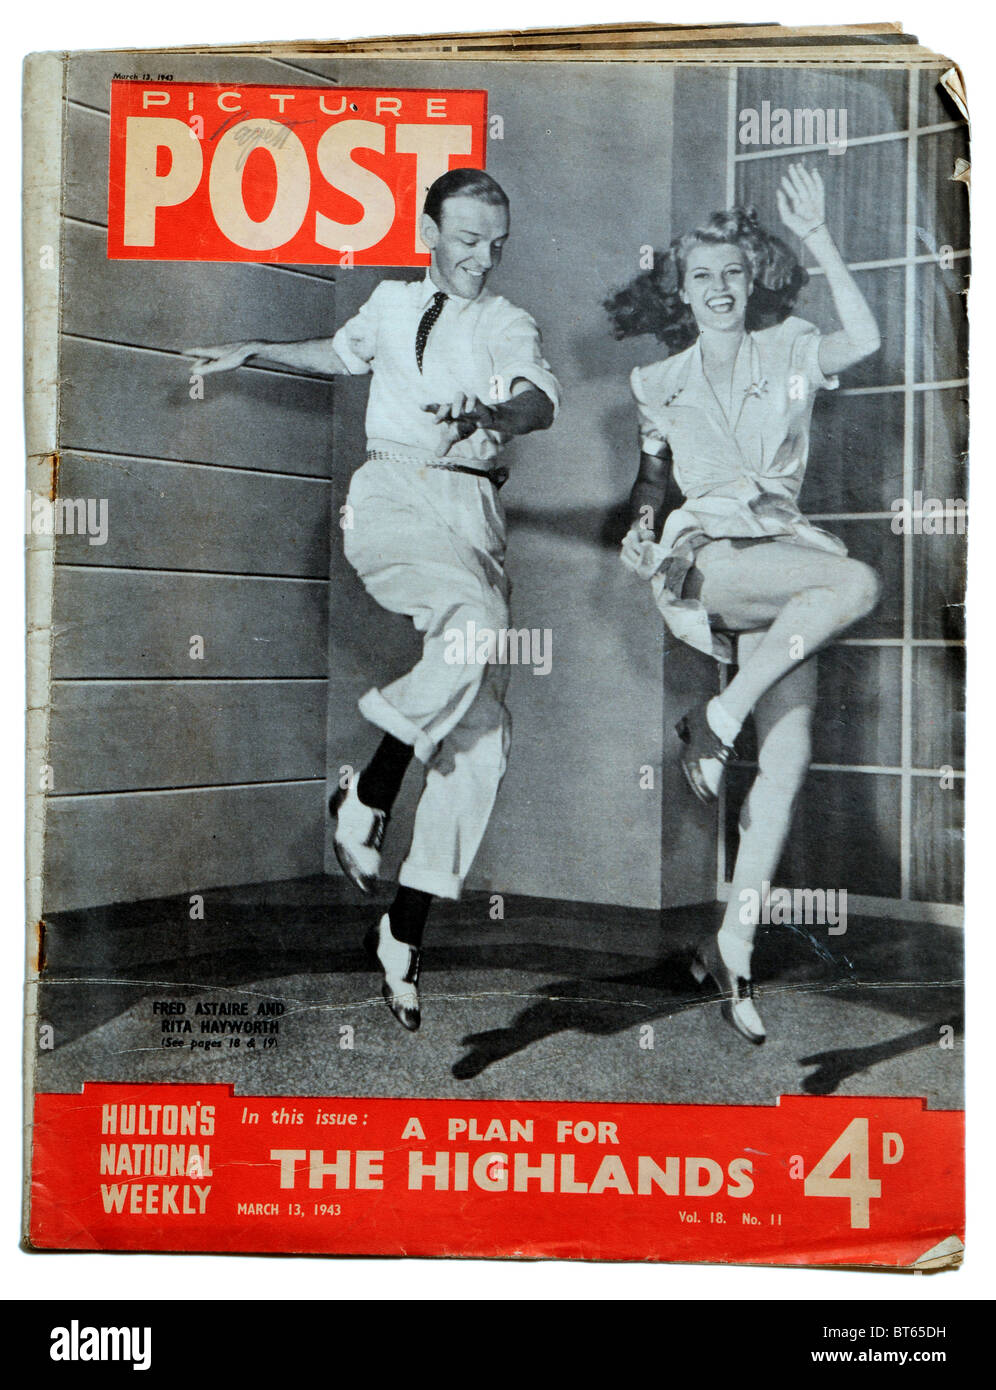 Fred astaire rita hayworth tap dance dancing 13 march 1943 film star hollywood Picture Post prominent photojournalistic magazine Stock Photo